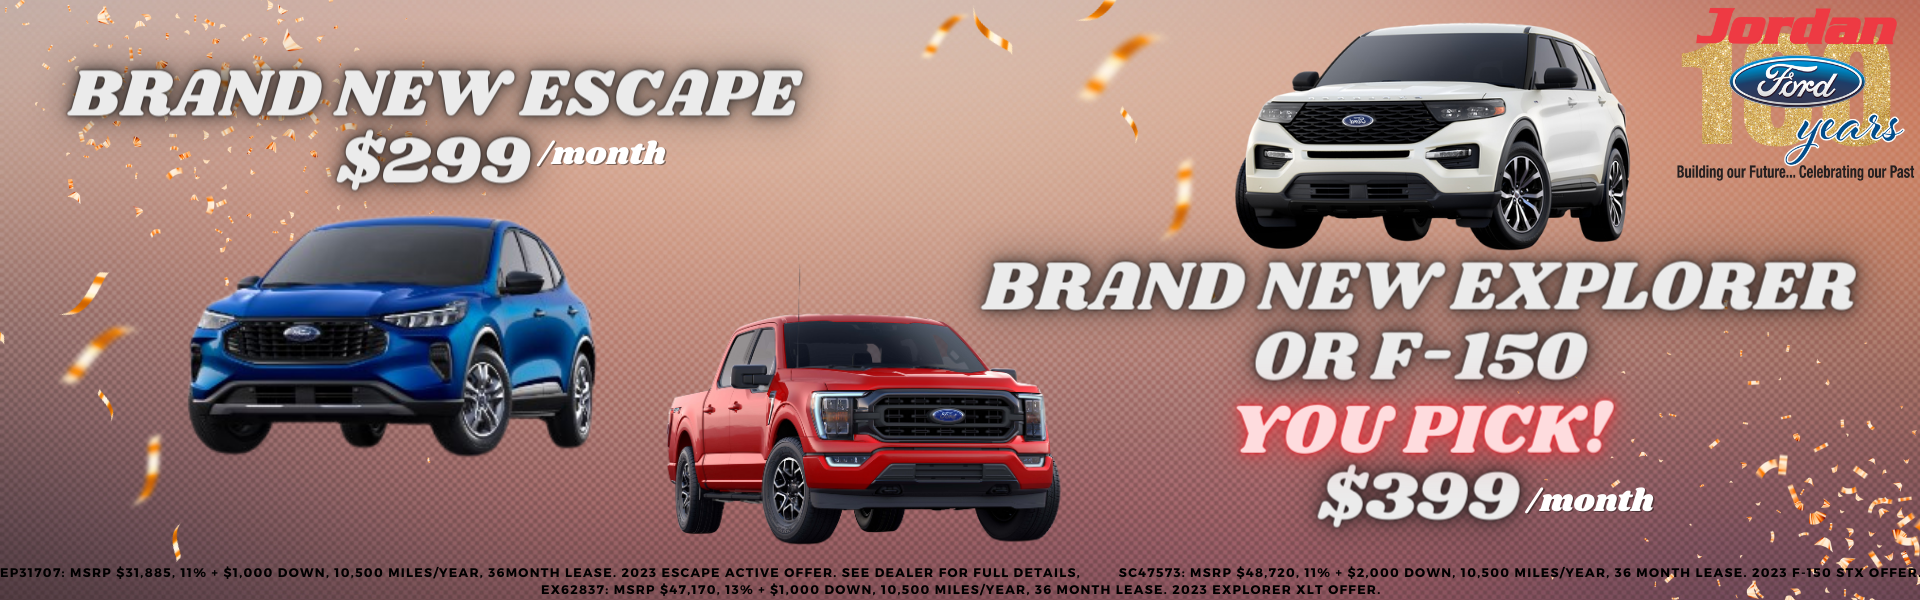 Lease offers on Escape, Explorer, F-150